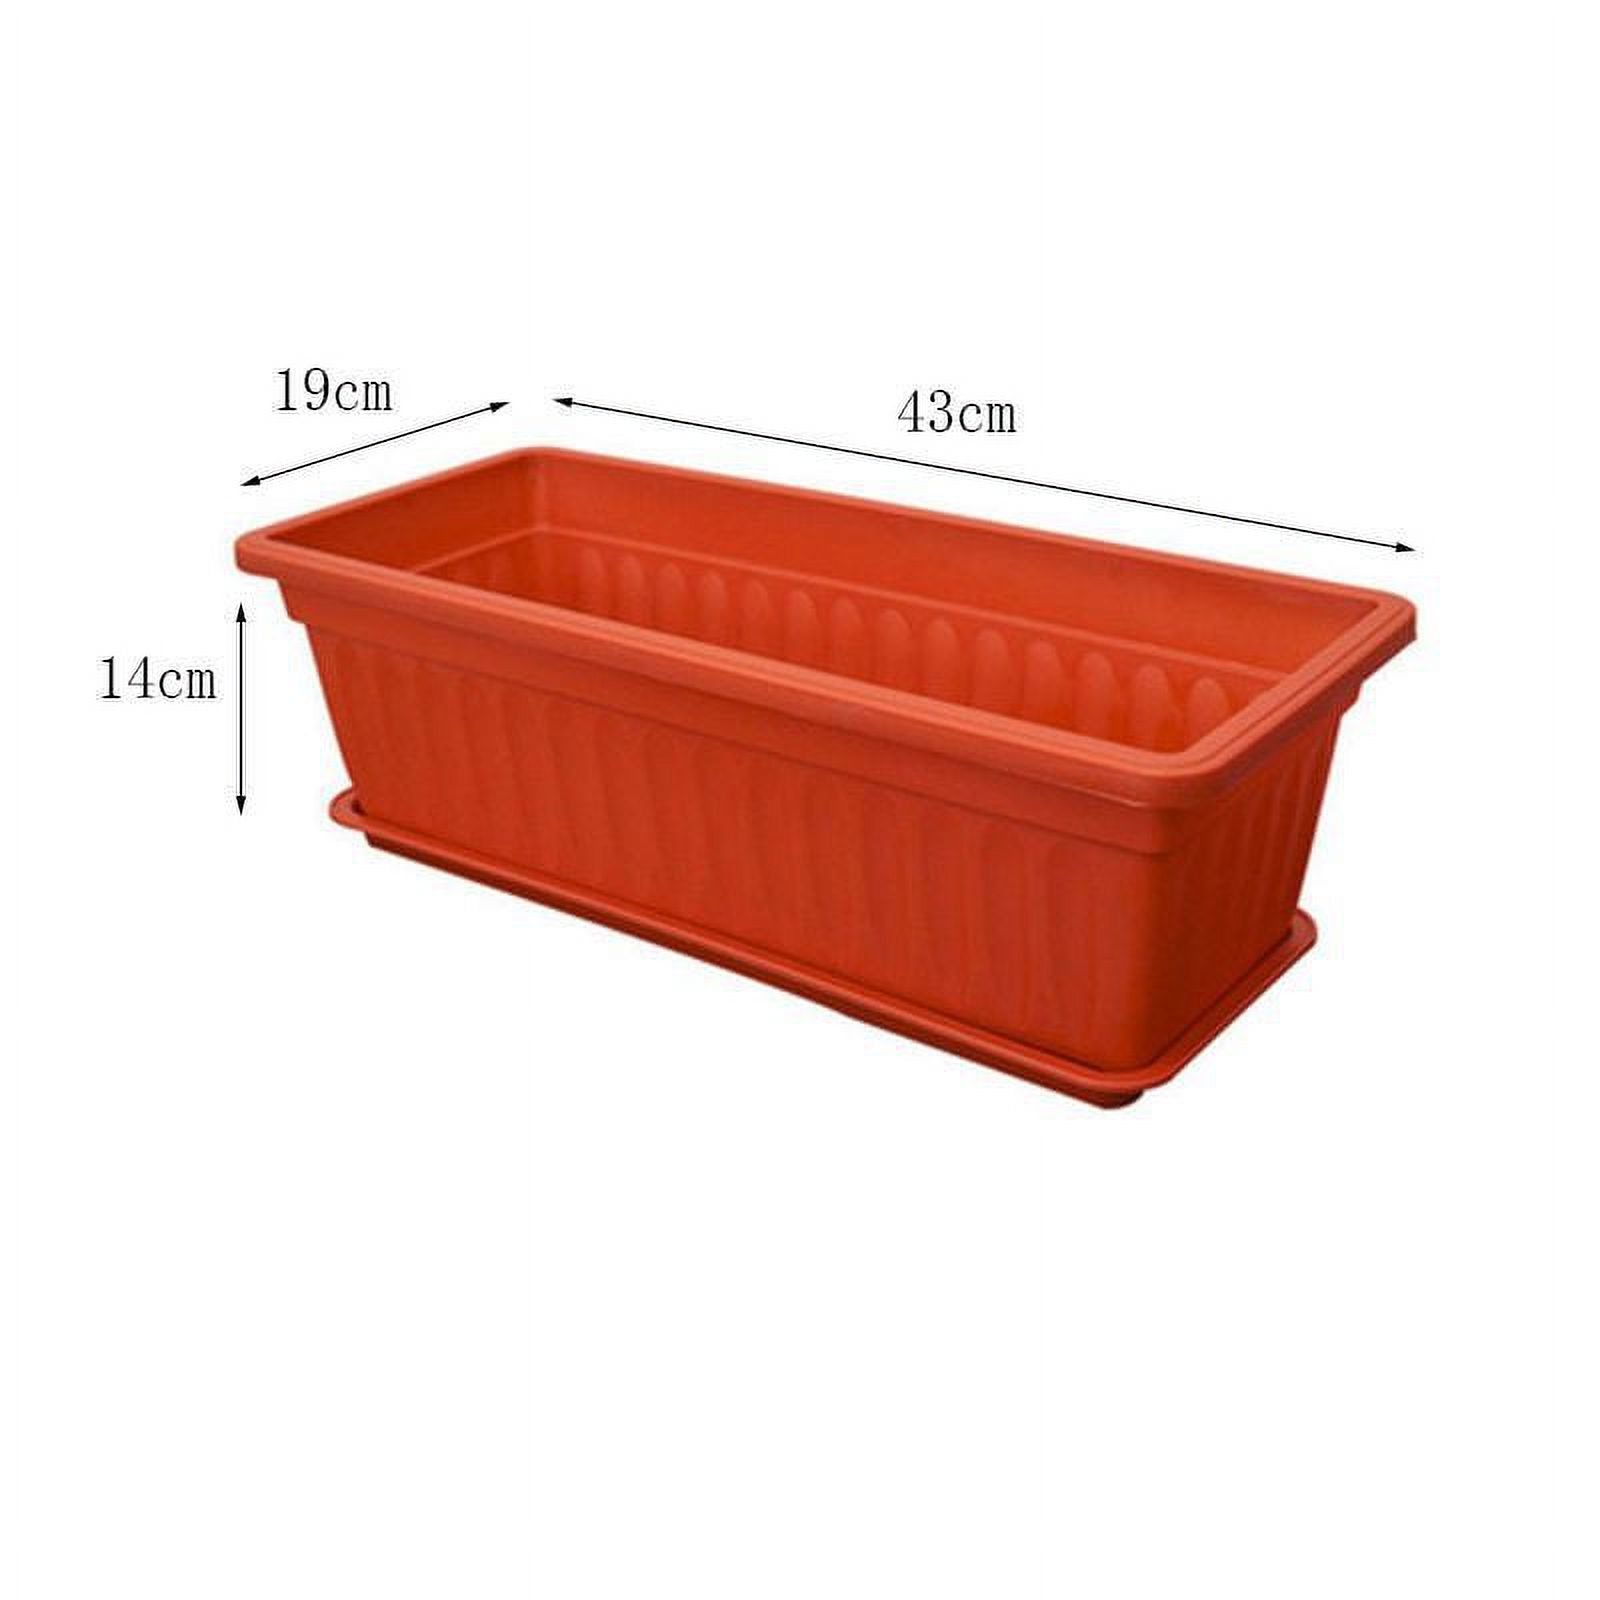 17 Inch Rectangular Plastic Thicken Planters with Trays - Window Planter Box for Outdoor and Indoor Herbs, Vegetables, Flowers and Succulent Plants (1 Pack Brick Red) - image 4 of 7